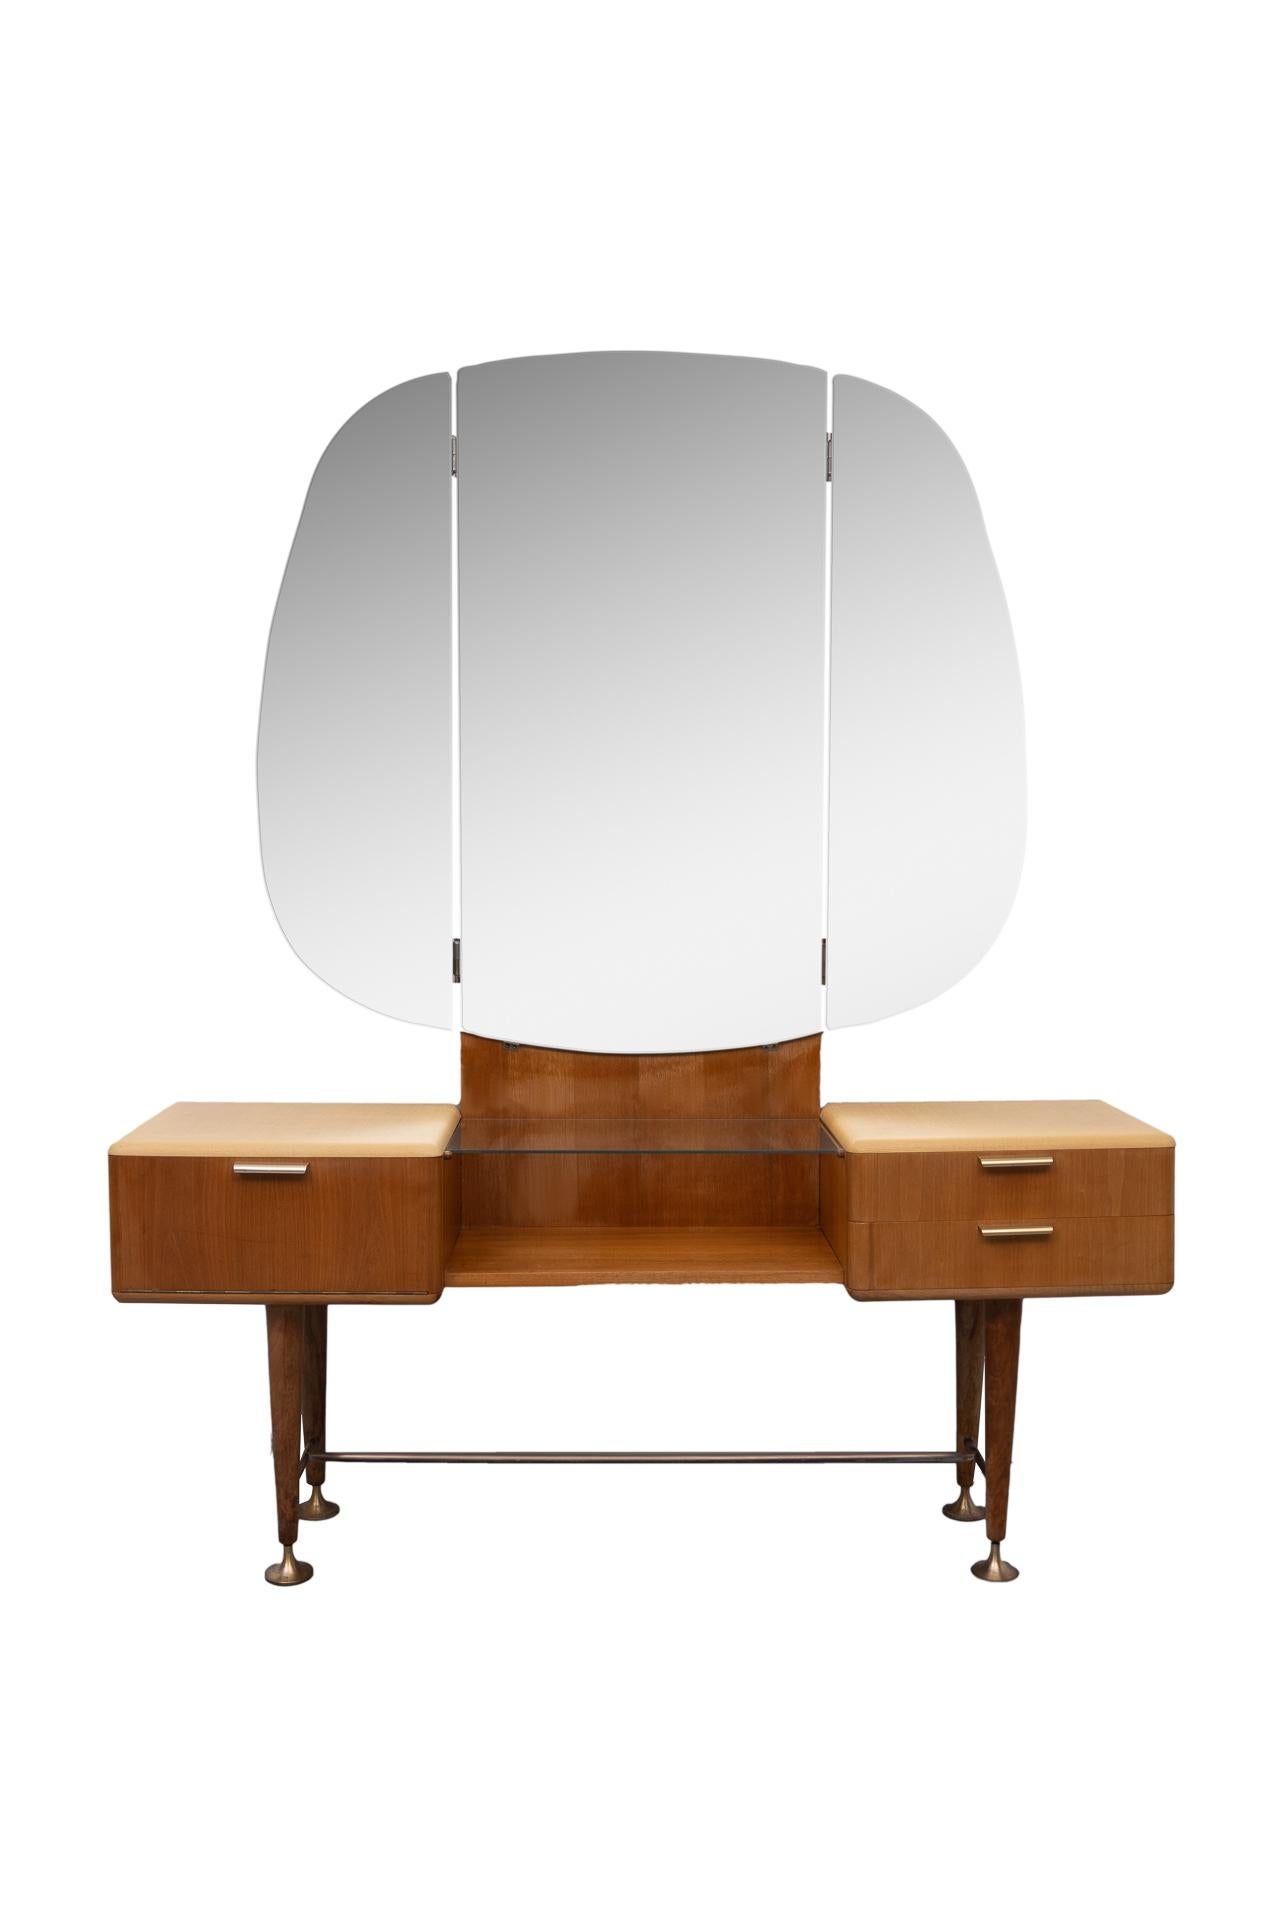 Wonderful and rare dressing table. Design by A. Patijn for Zijlstra Joure Holland 1950s well now for his curved furniture. Solid brass elegant adjustable feet. Original mirrors. The drawers feature a bent plywood interior. Brass handles.
  